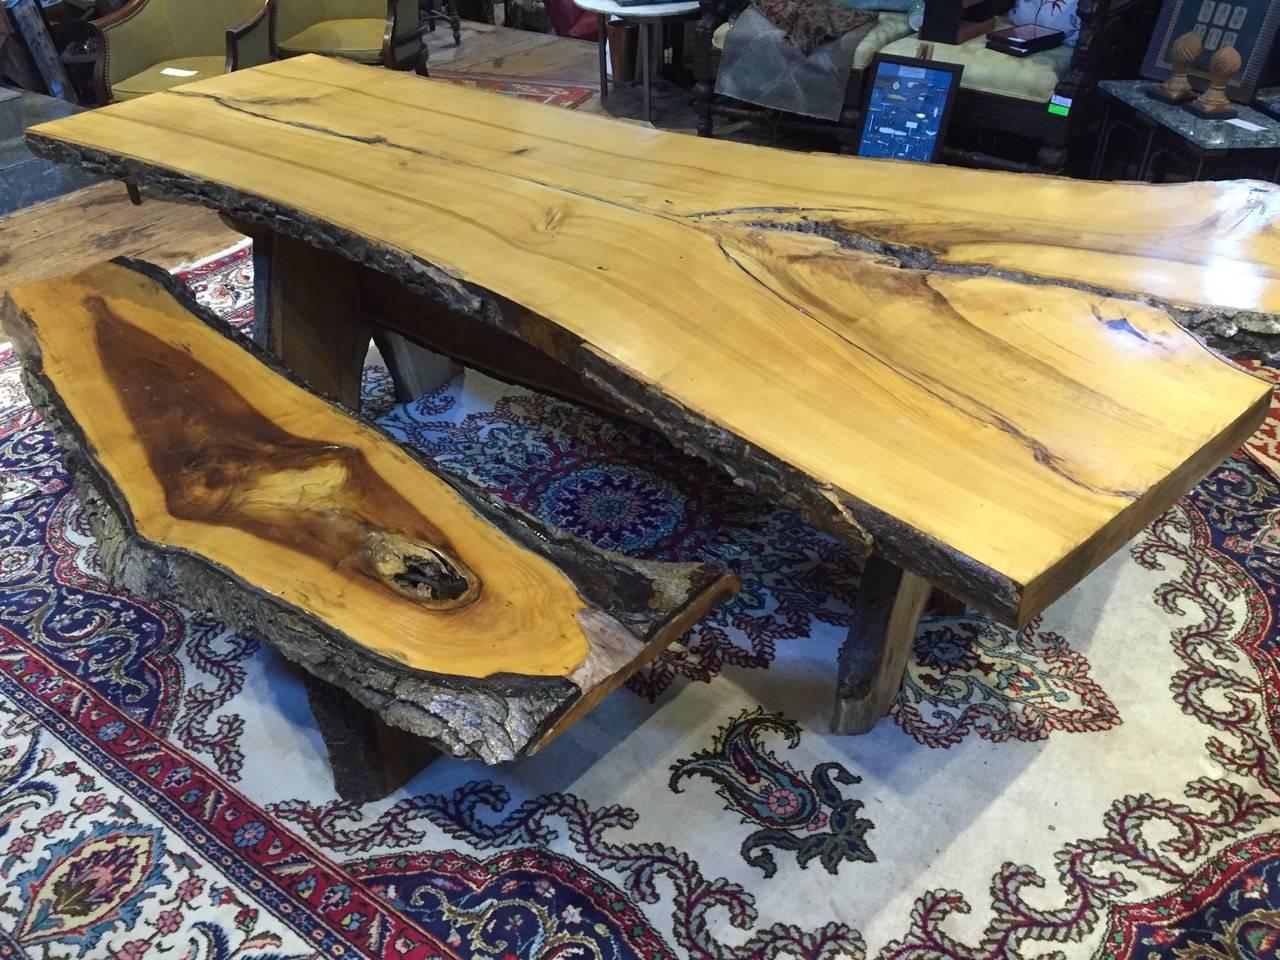 Pine live edge dining table with two benches. Table measures 33” wide at narrow end, 53” wide at wide end, 8 ft 6 inches long, 30.5 high and 2 7/8 thick. 

Benches measure: 76” long, 18” high and vary from 14-18” deep.

Polyurethane finish on